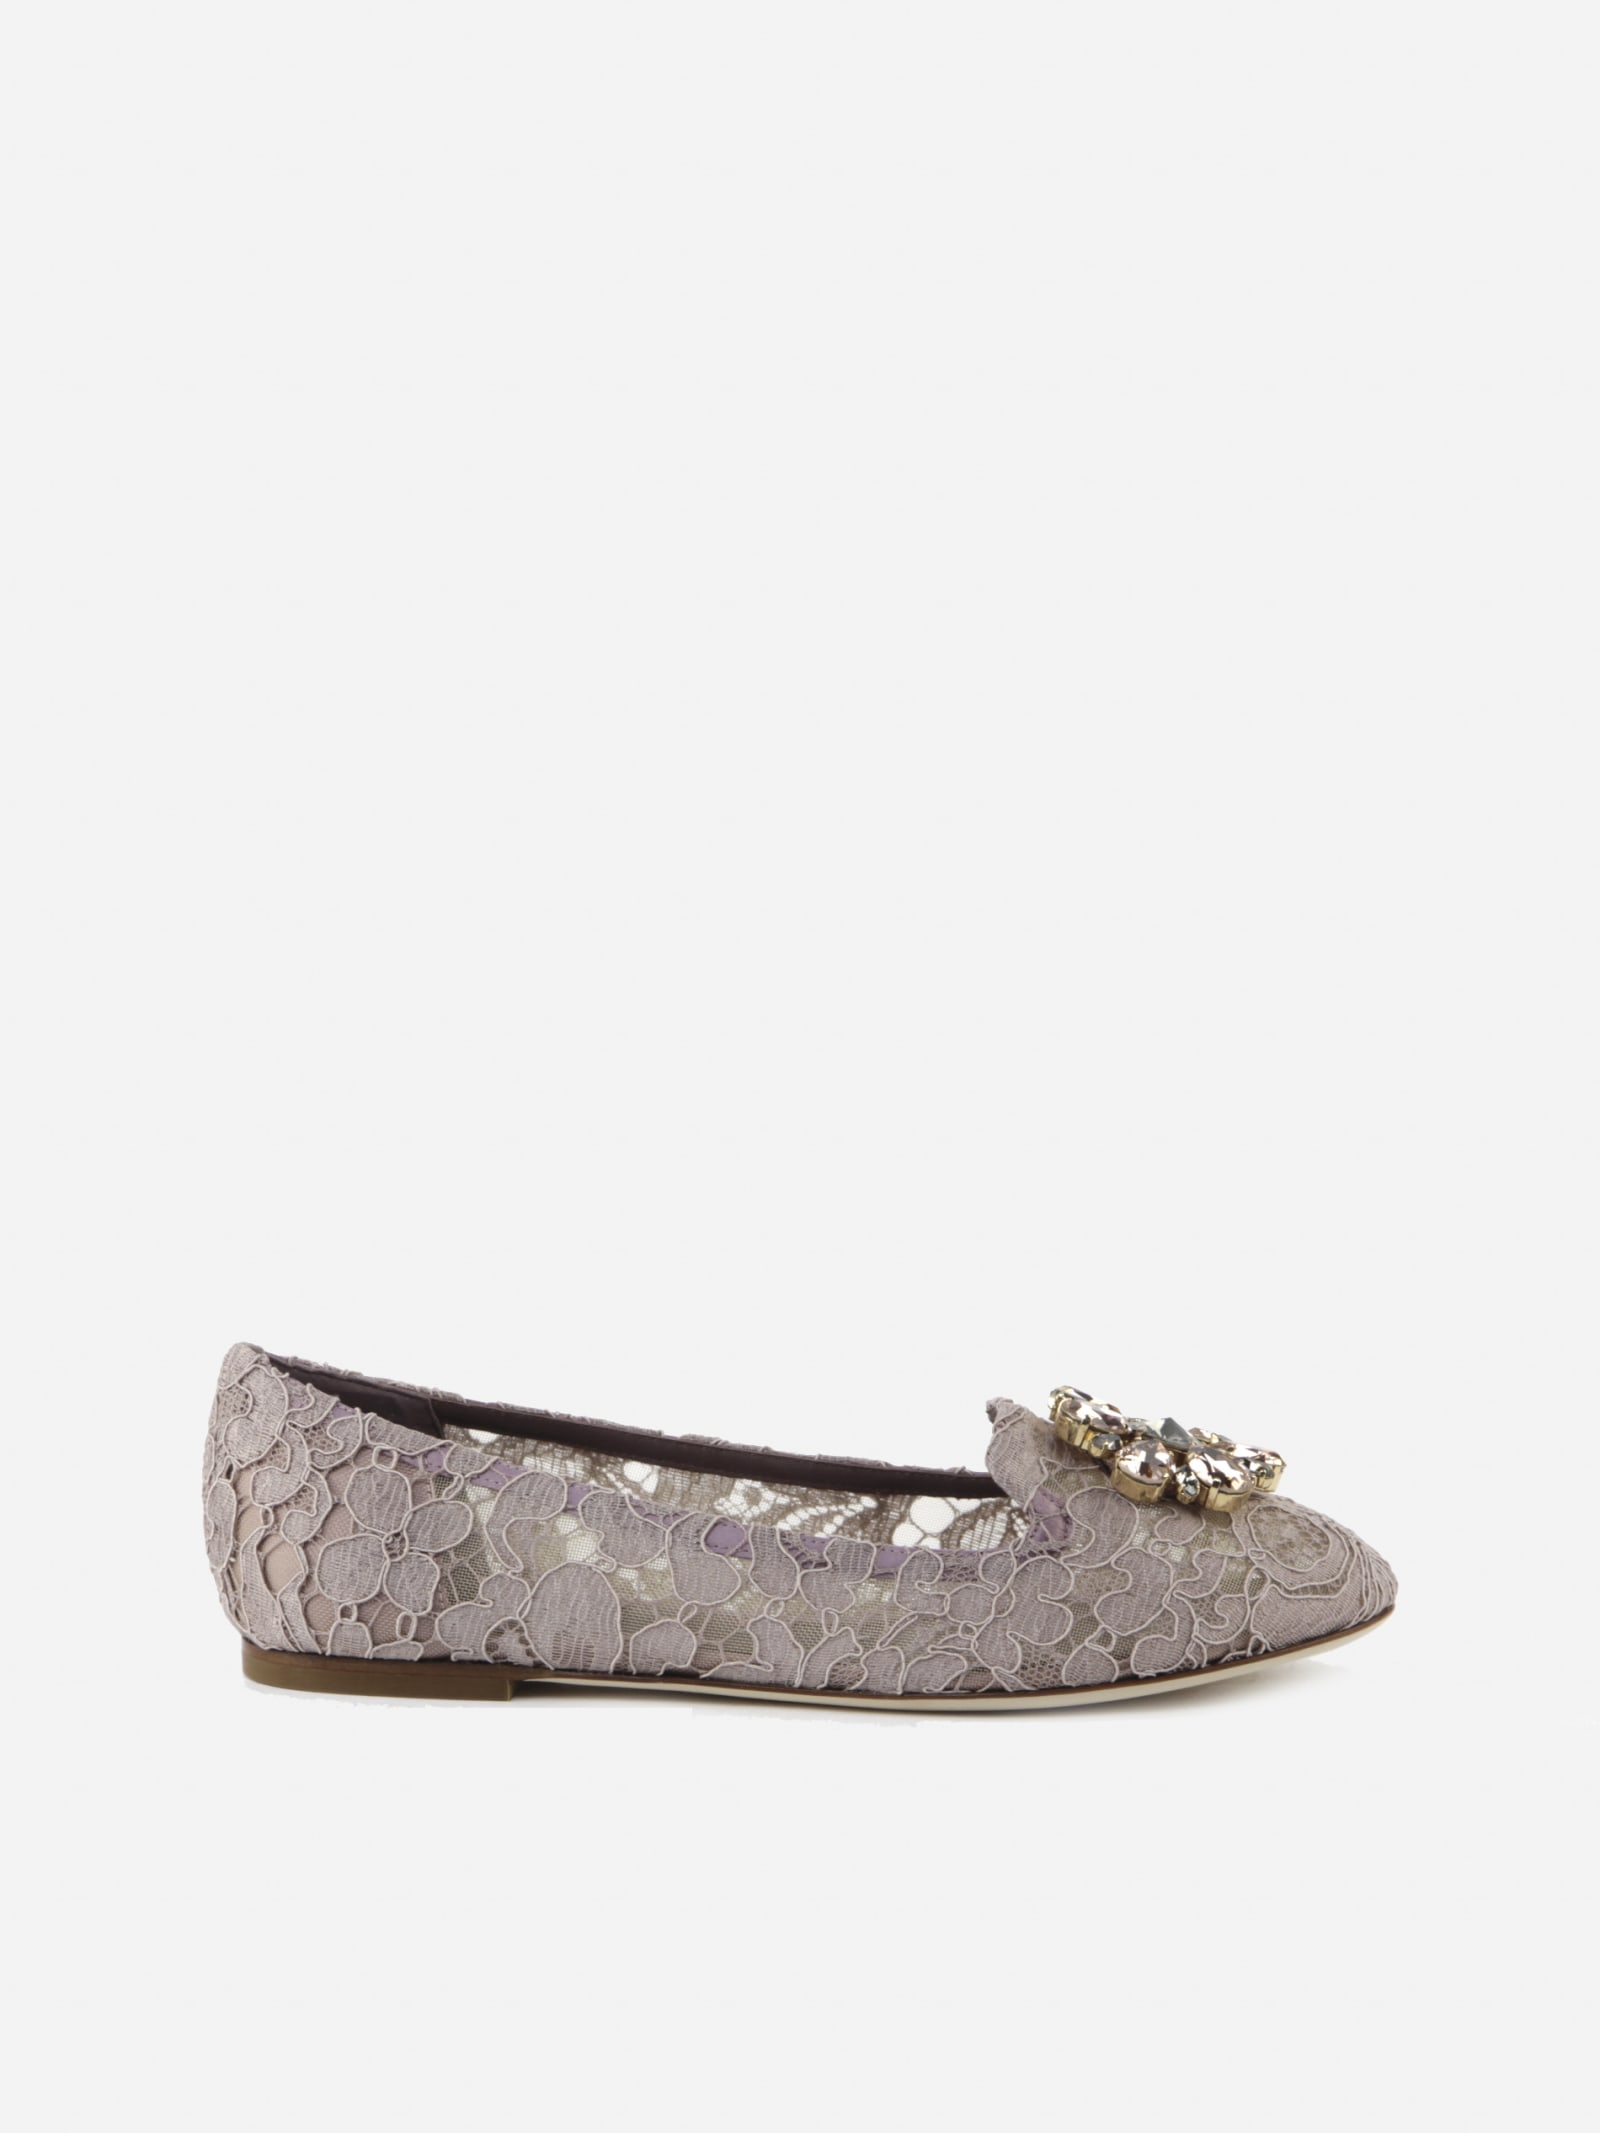 Dolce & Gabbana Vally Slippers In Taormina Lace